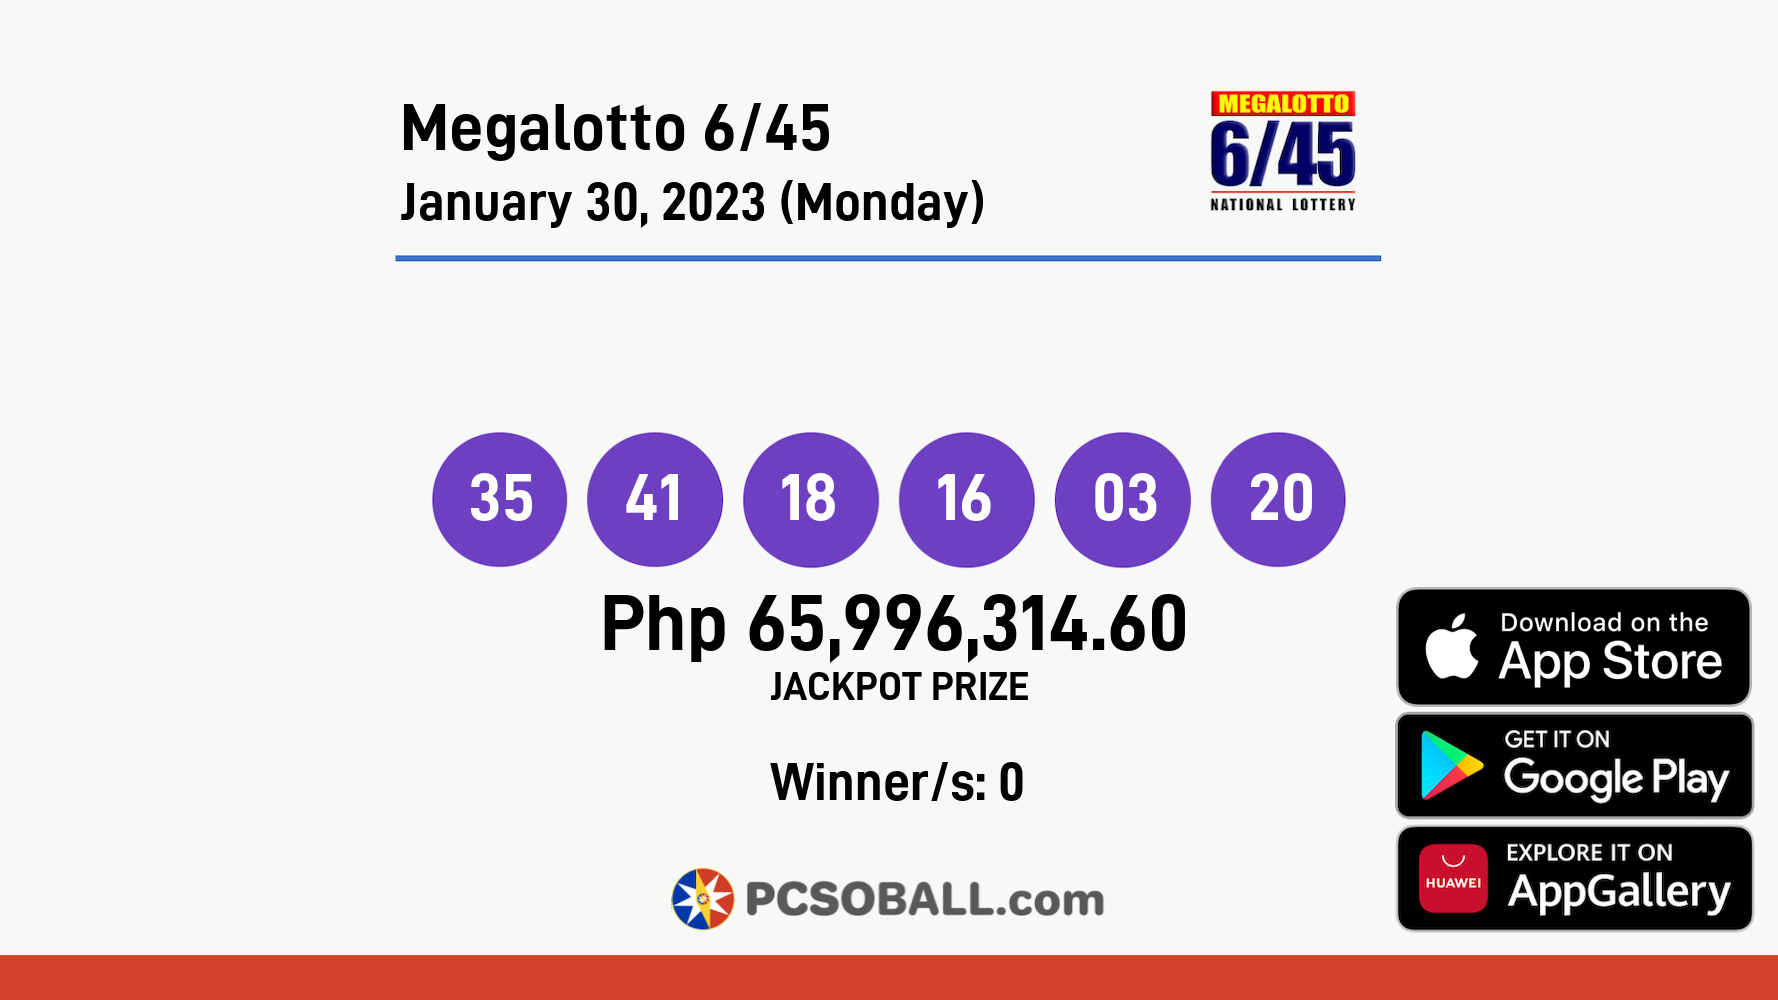 Megalotto 6/45 January 30, 2023 (Monday) Result